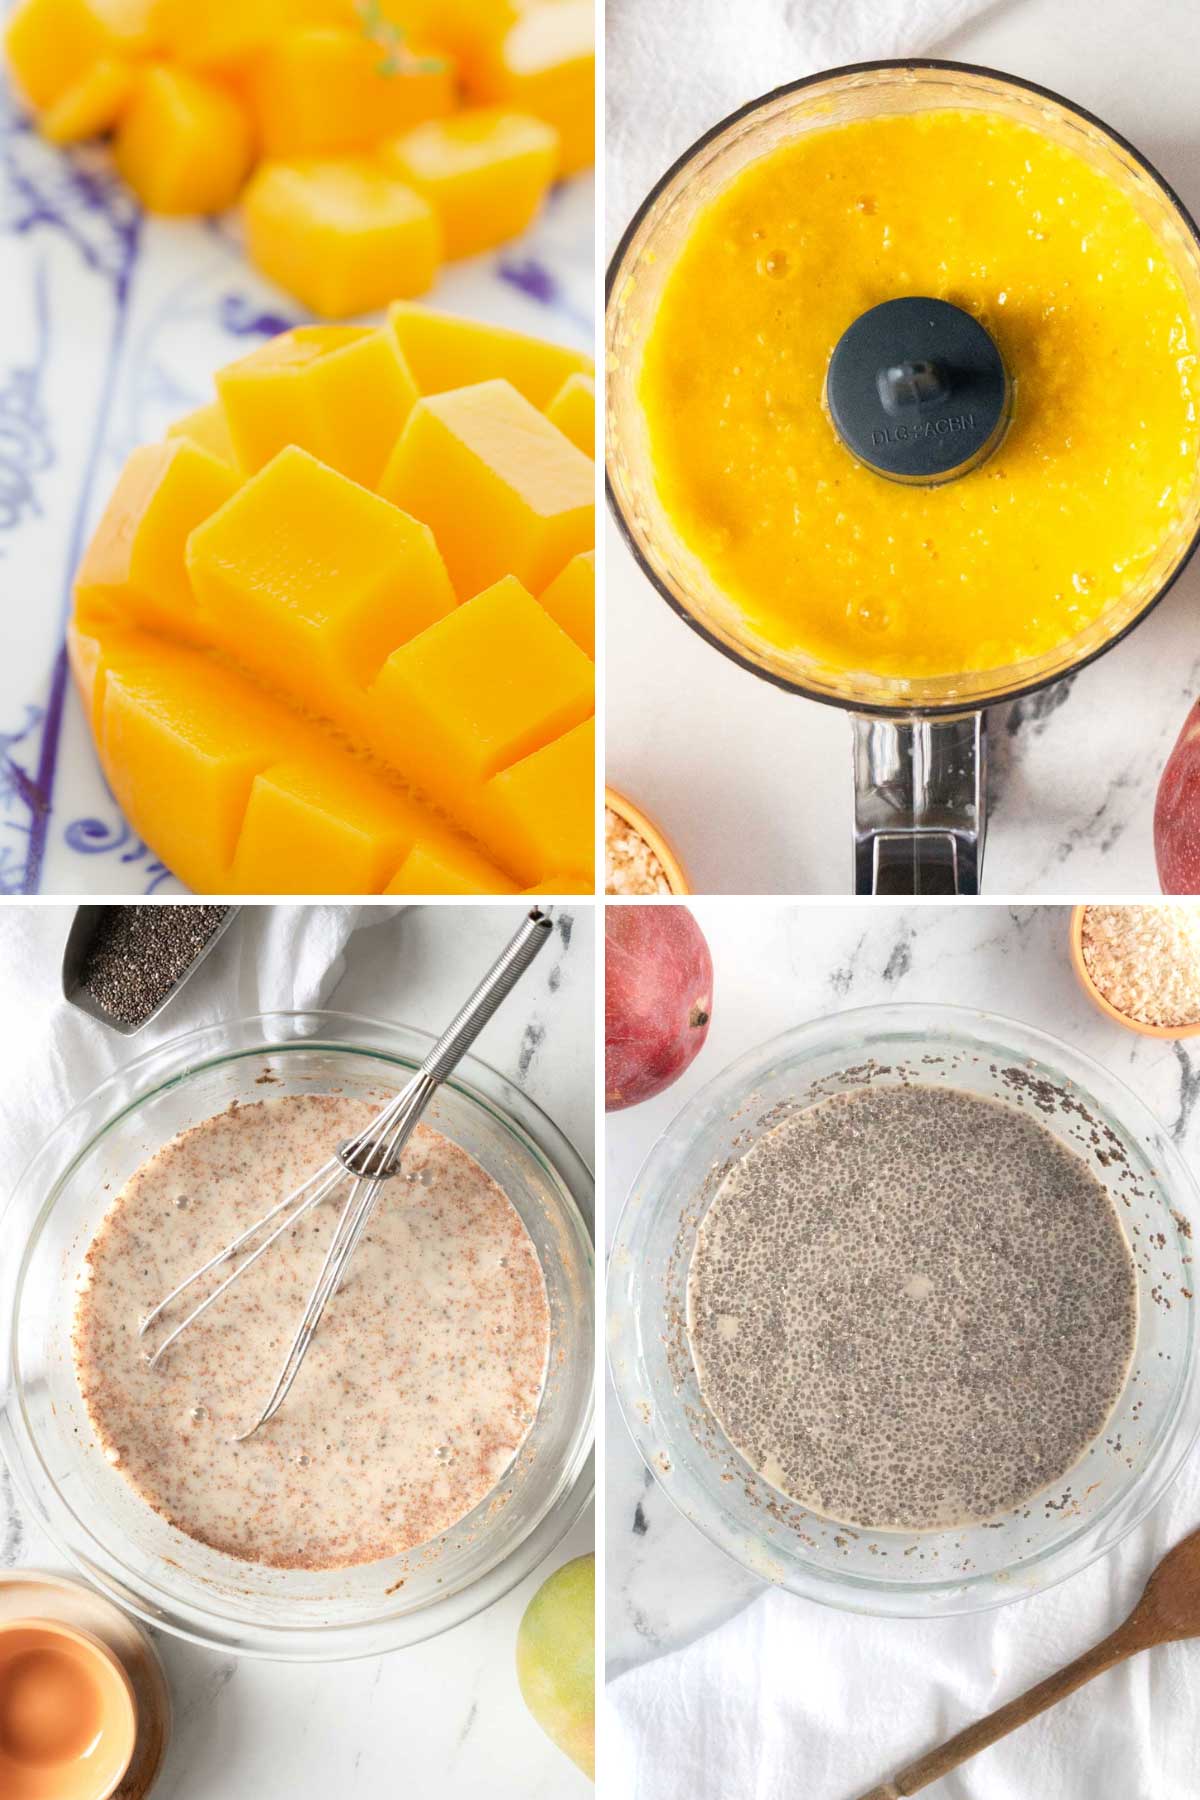 Chia pudding before and after sitting overnight.